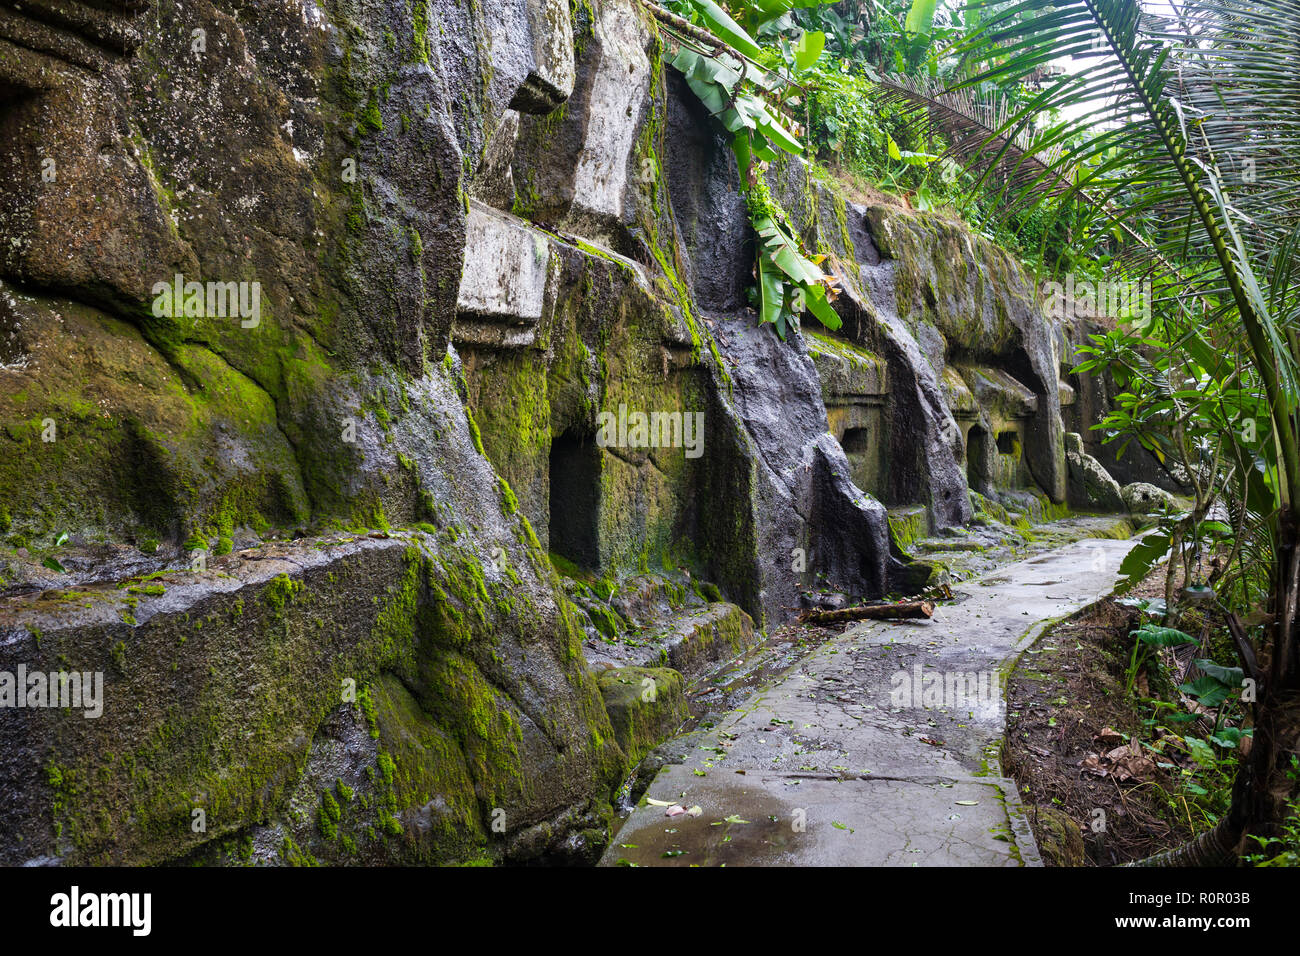 Gunung Kawi. Ancient carved in the stone temple with royal tombs. Bali, Indonesia. PANORAMA, long format. Stock Photo